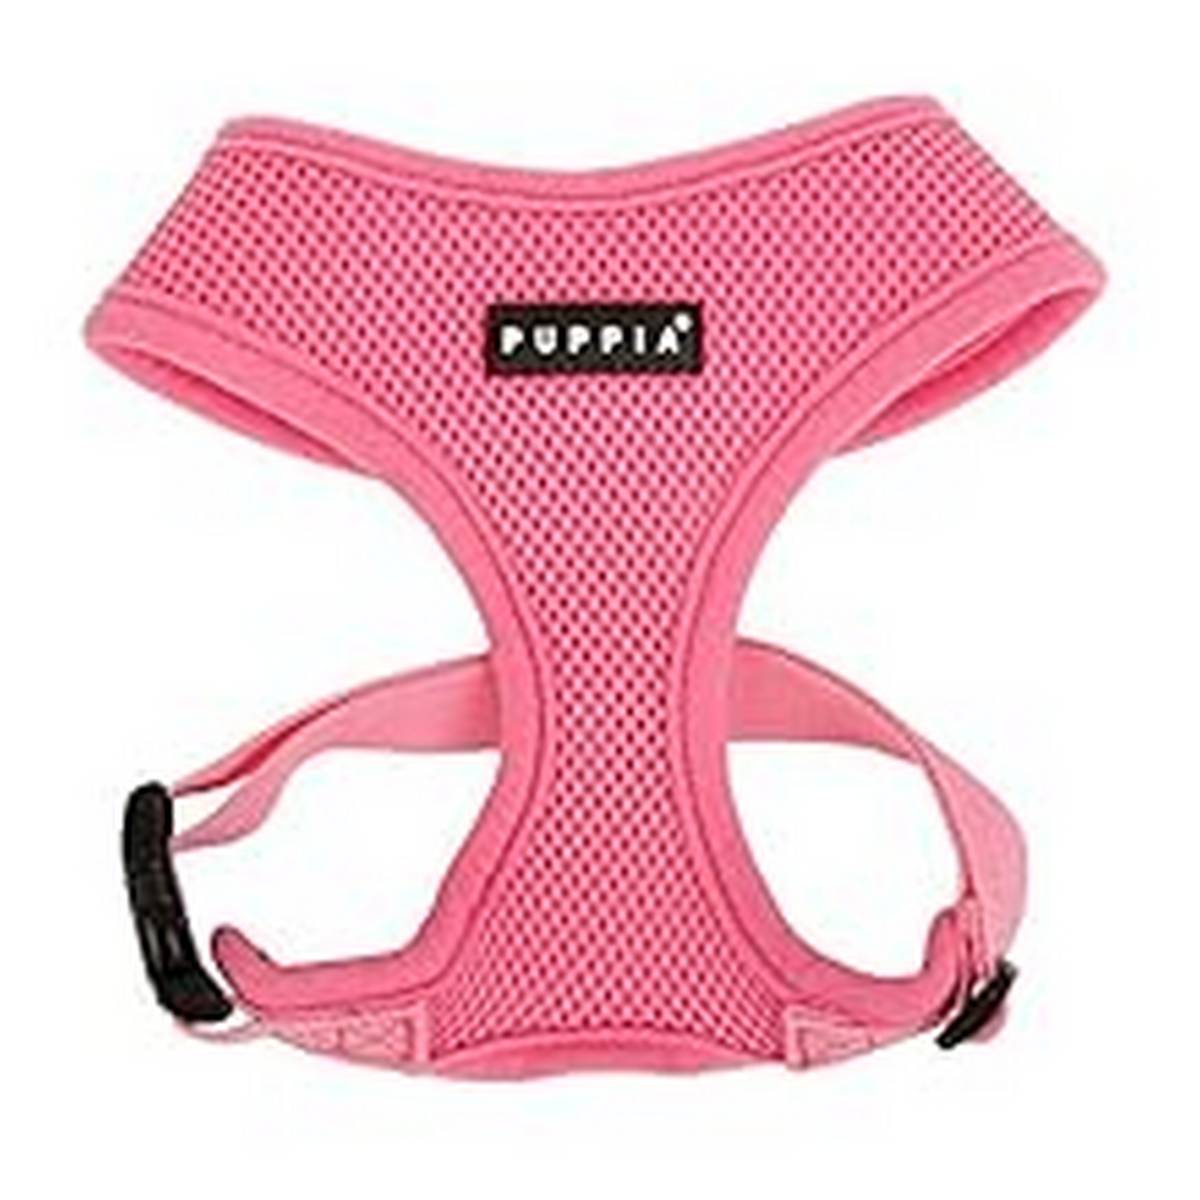 Supplies_Puppia Soft Dog Harness No Choke Over-The-Head Triple Layered Breathable Mesh Adjustable Chest Belt and Quick-Release Buckle Pink Small